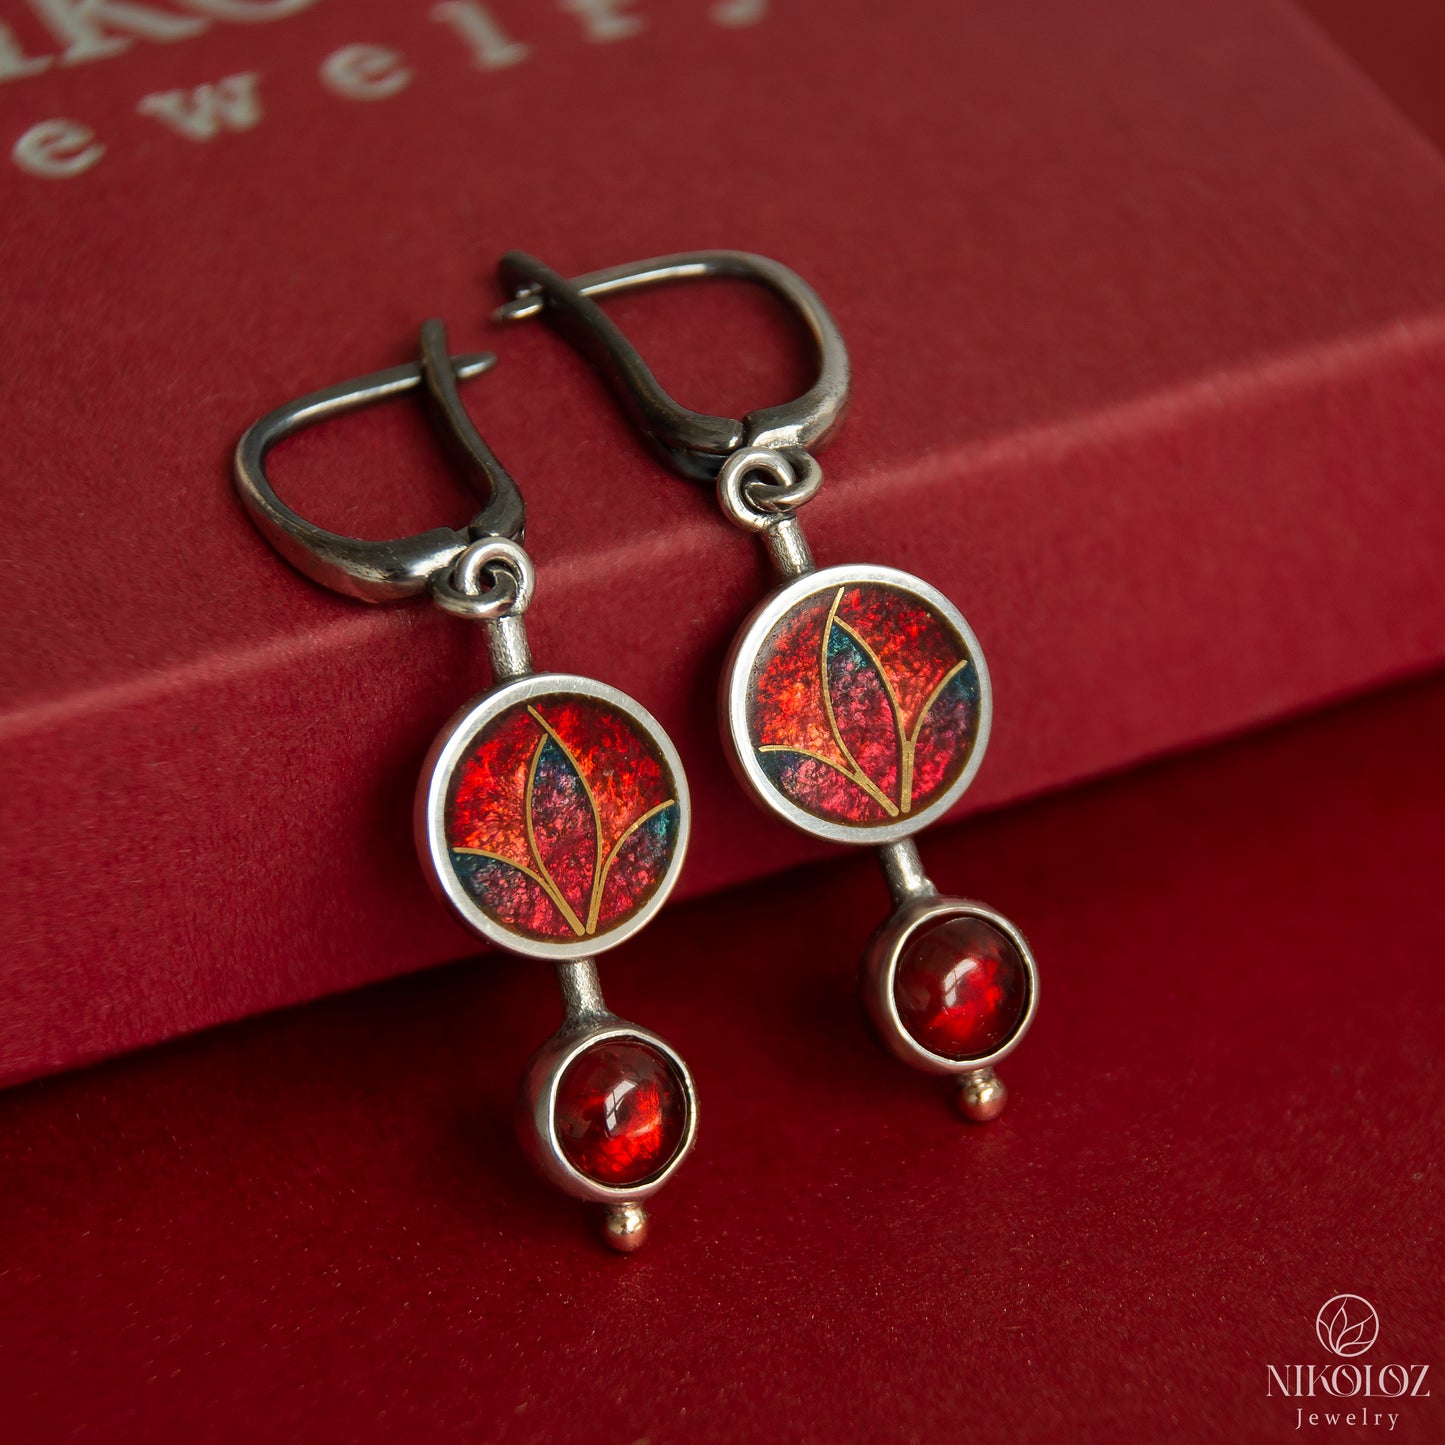 Cloisonné Enamel Red Earrings With Gold And Garnet Stones